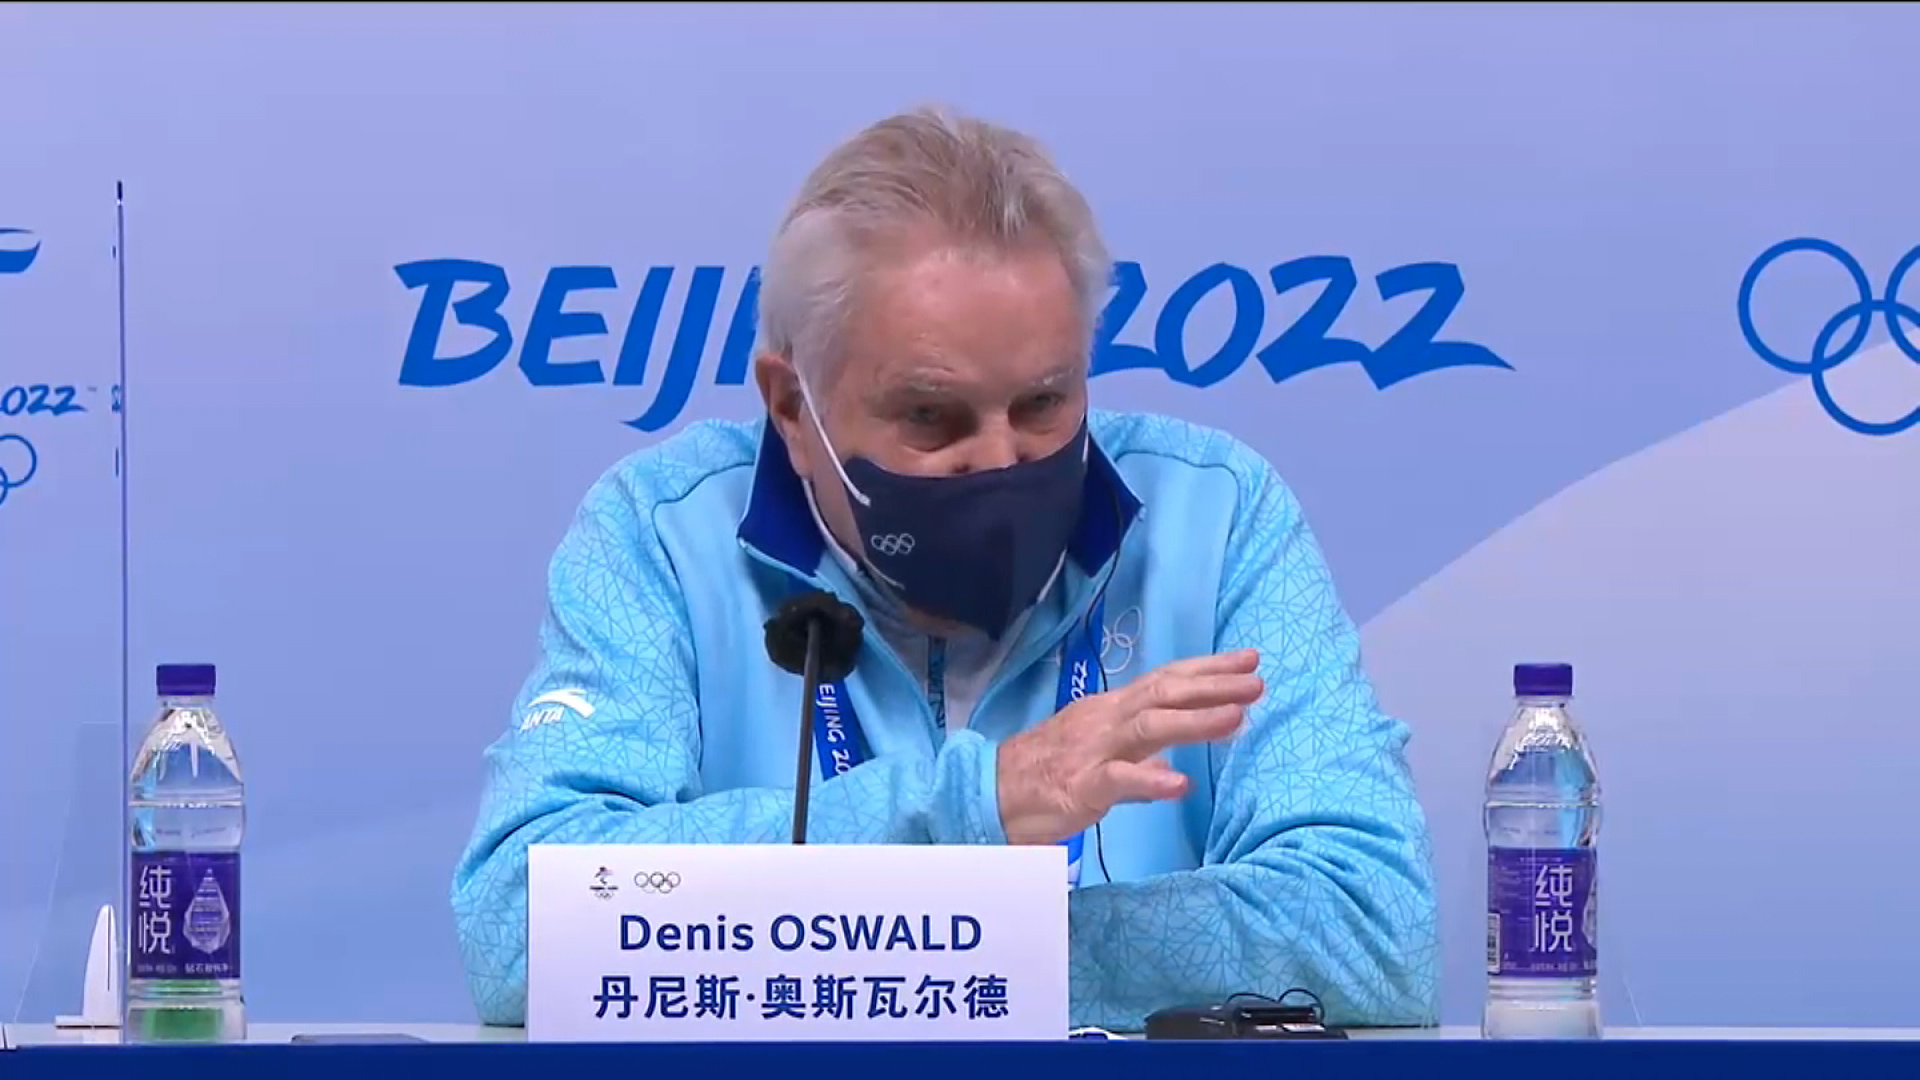 Denis Oswald of the IOC speaks at a news conference Tuesday.